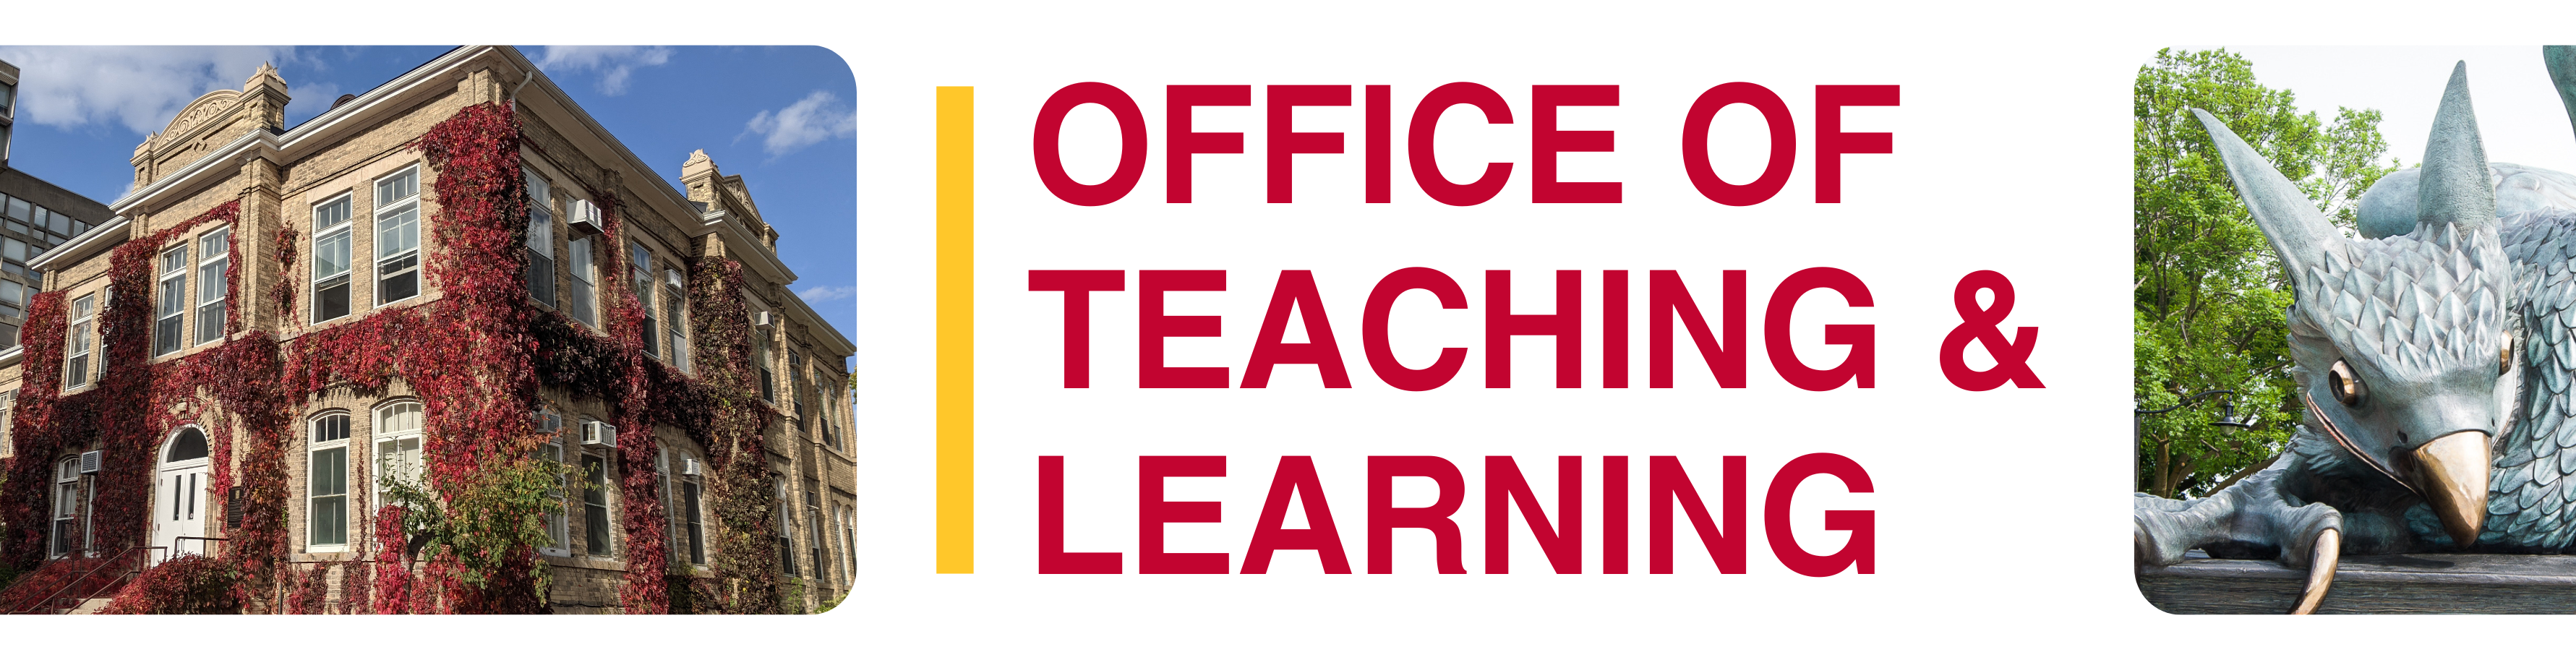 What does the Office of Teaching & Learning Do. Click link below